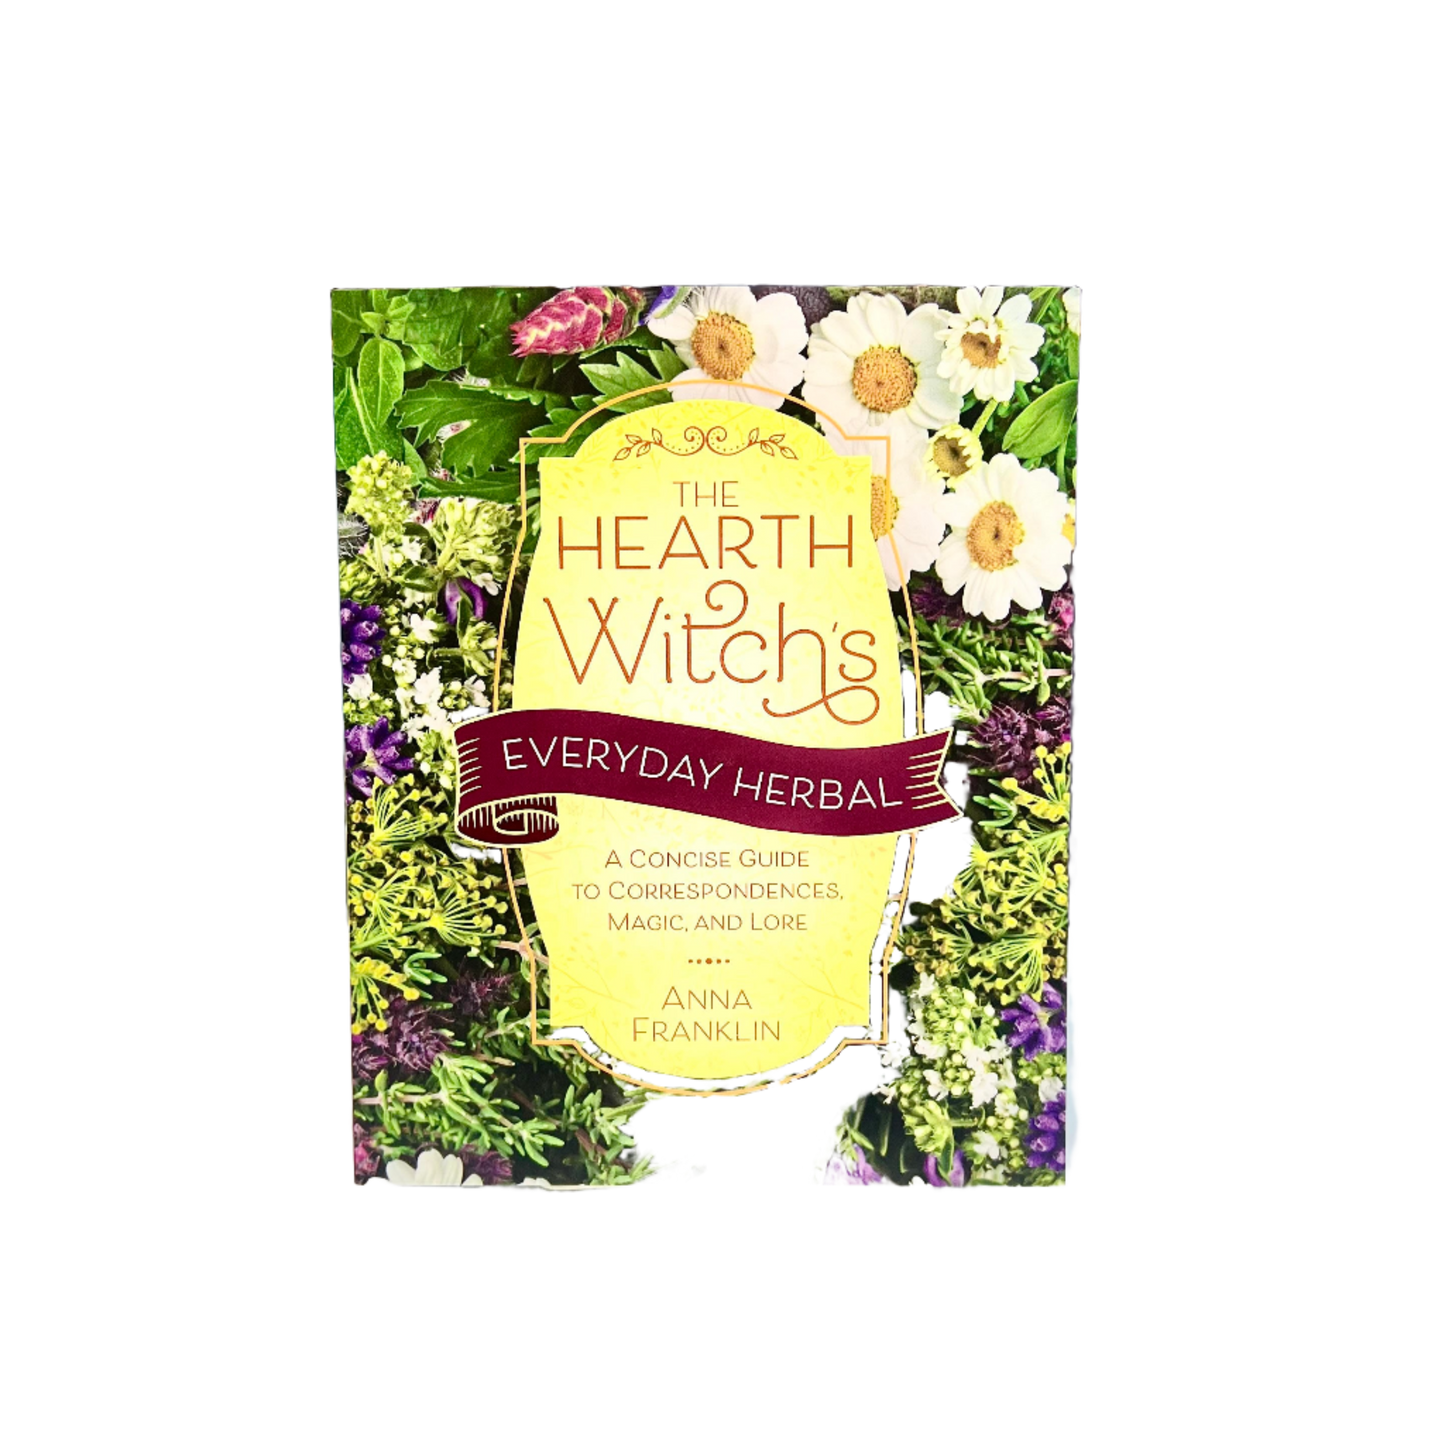 The Hearth Witch's Everyday Herbal by Anna Franklin